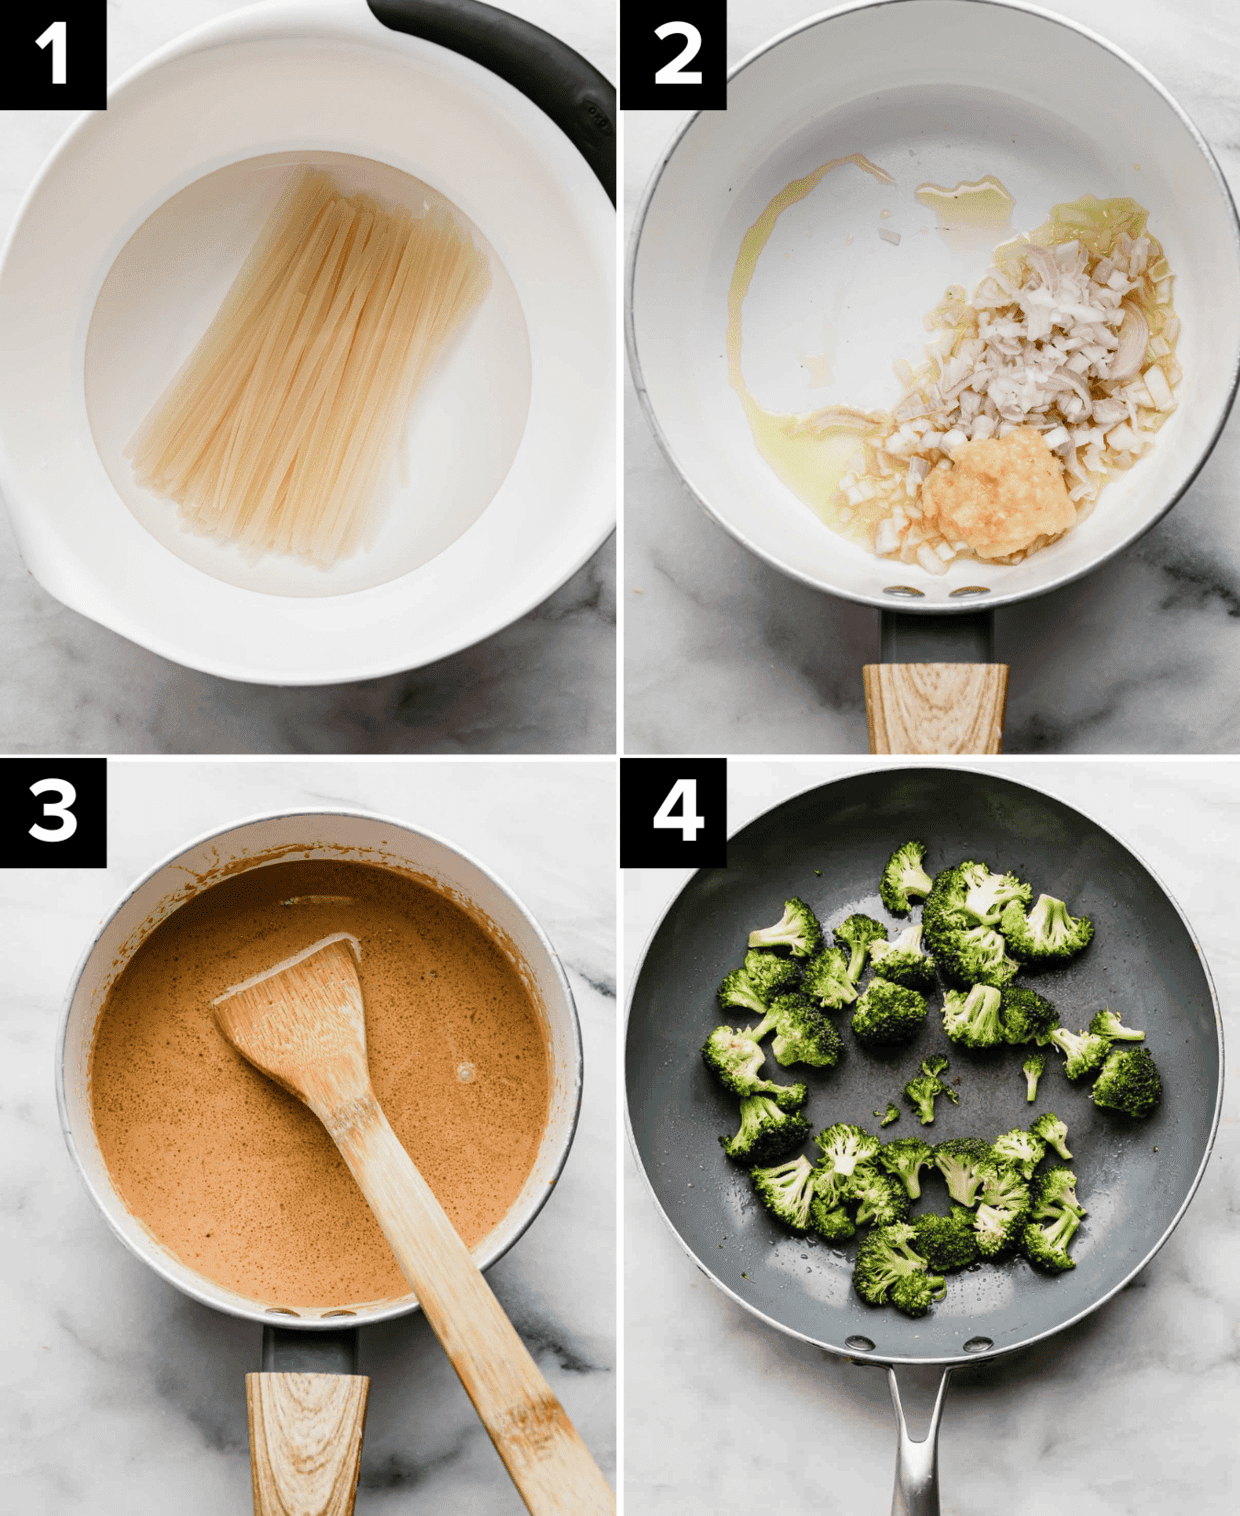 Four images showing Coconut Curry Noodles, top left: rice noodles in white bowl, top right is white pot with diced onion and ginger, and bottom left is curry sauce in white saucepan, top right is broccoli in saucepan.